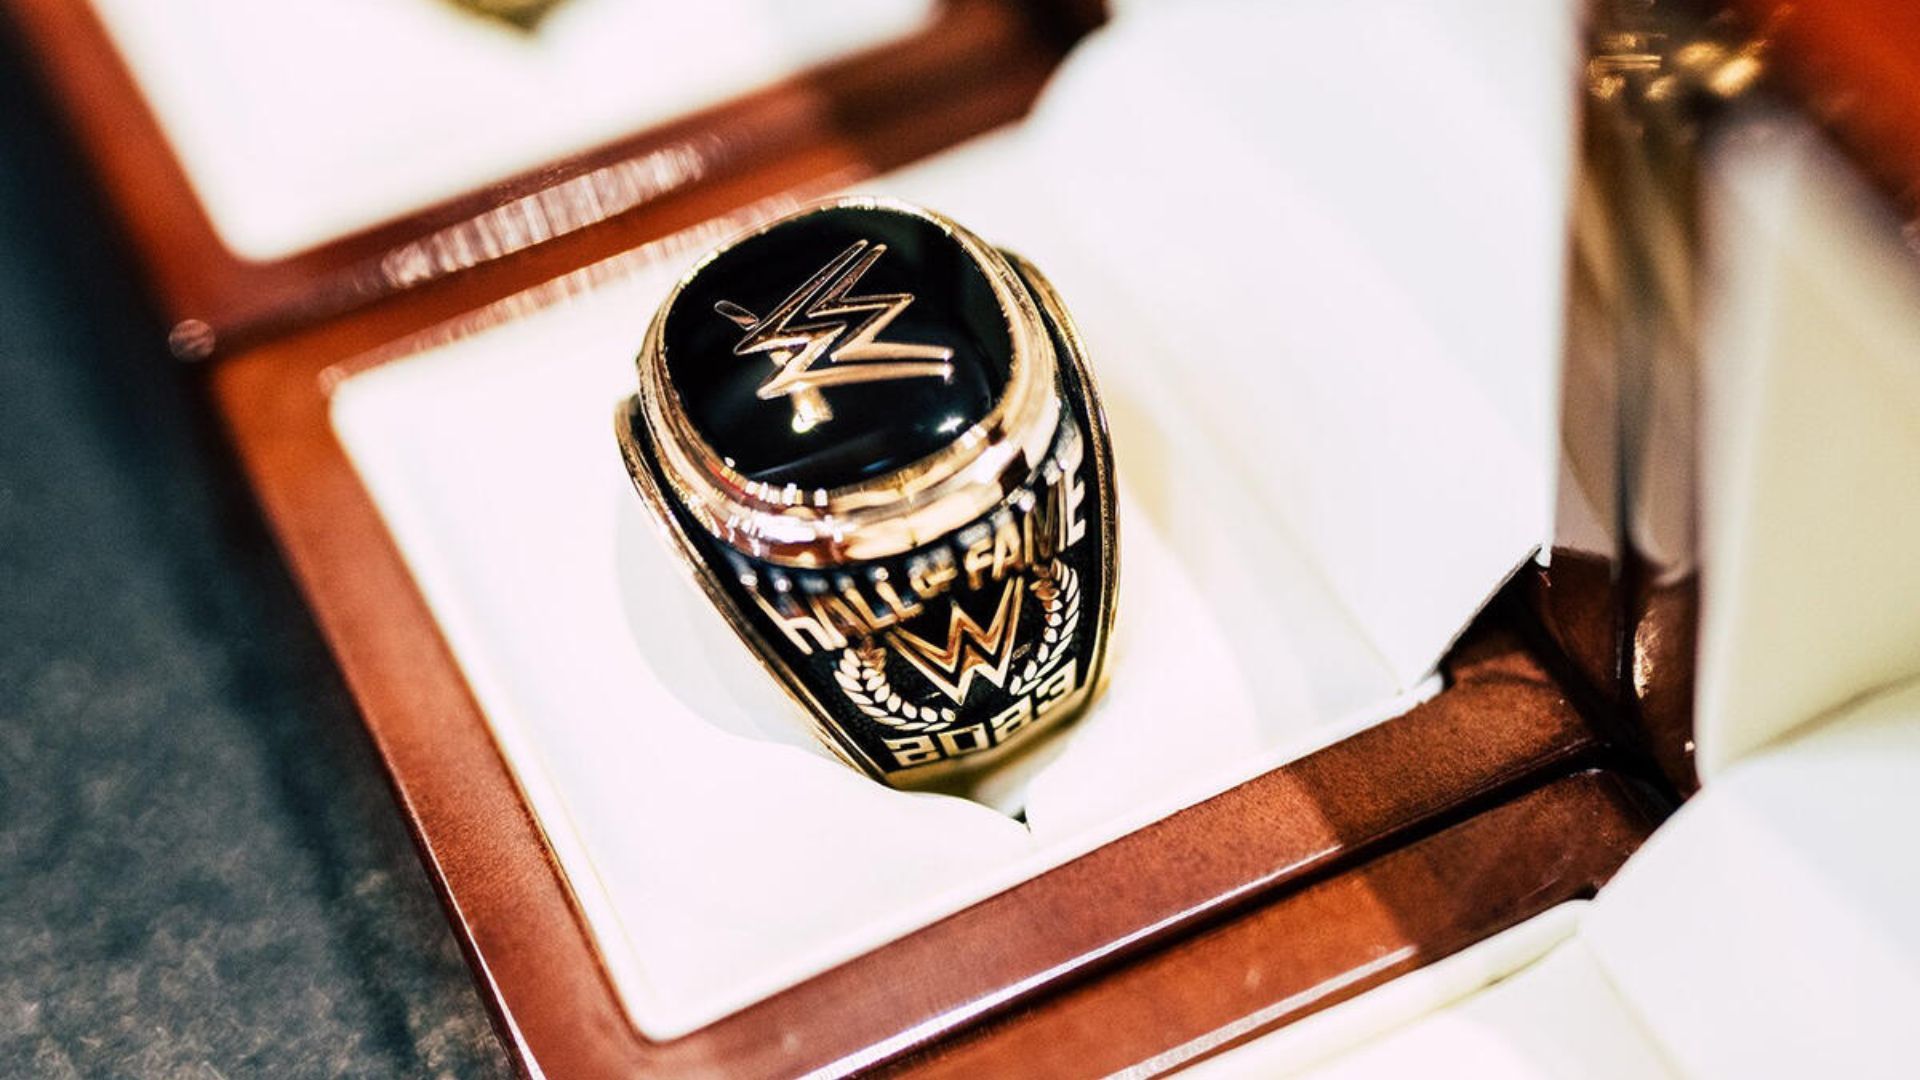 The prestigious WWE Hall of Fame ring.